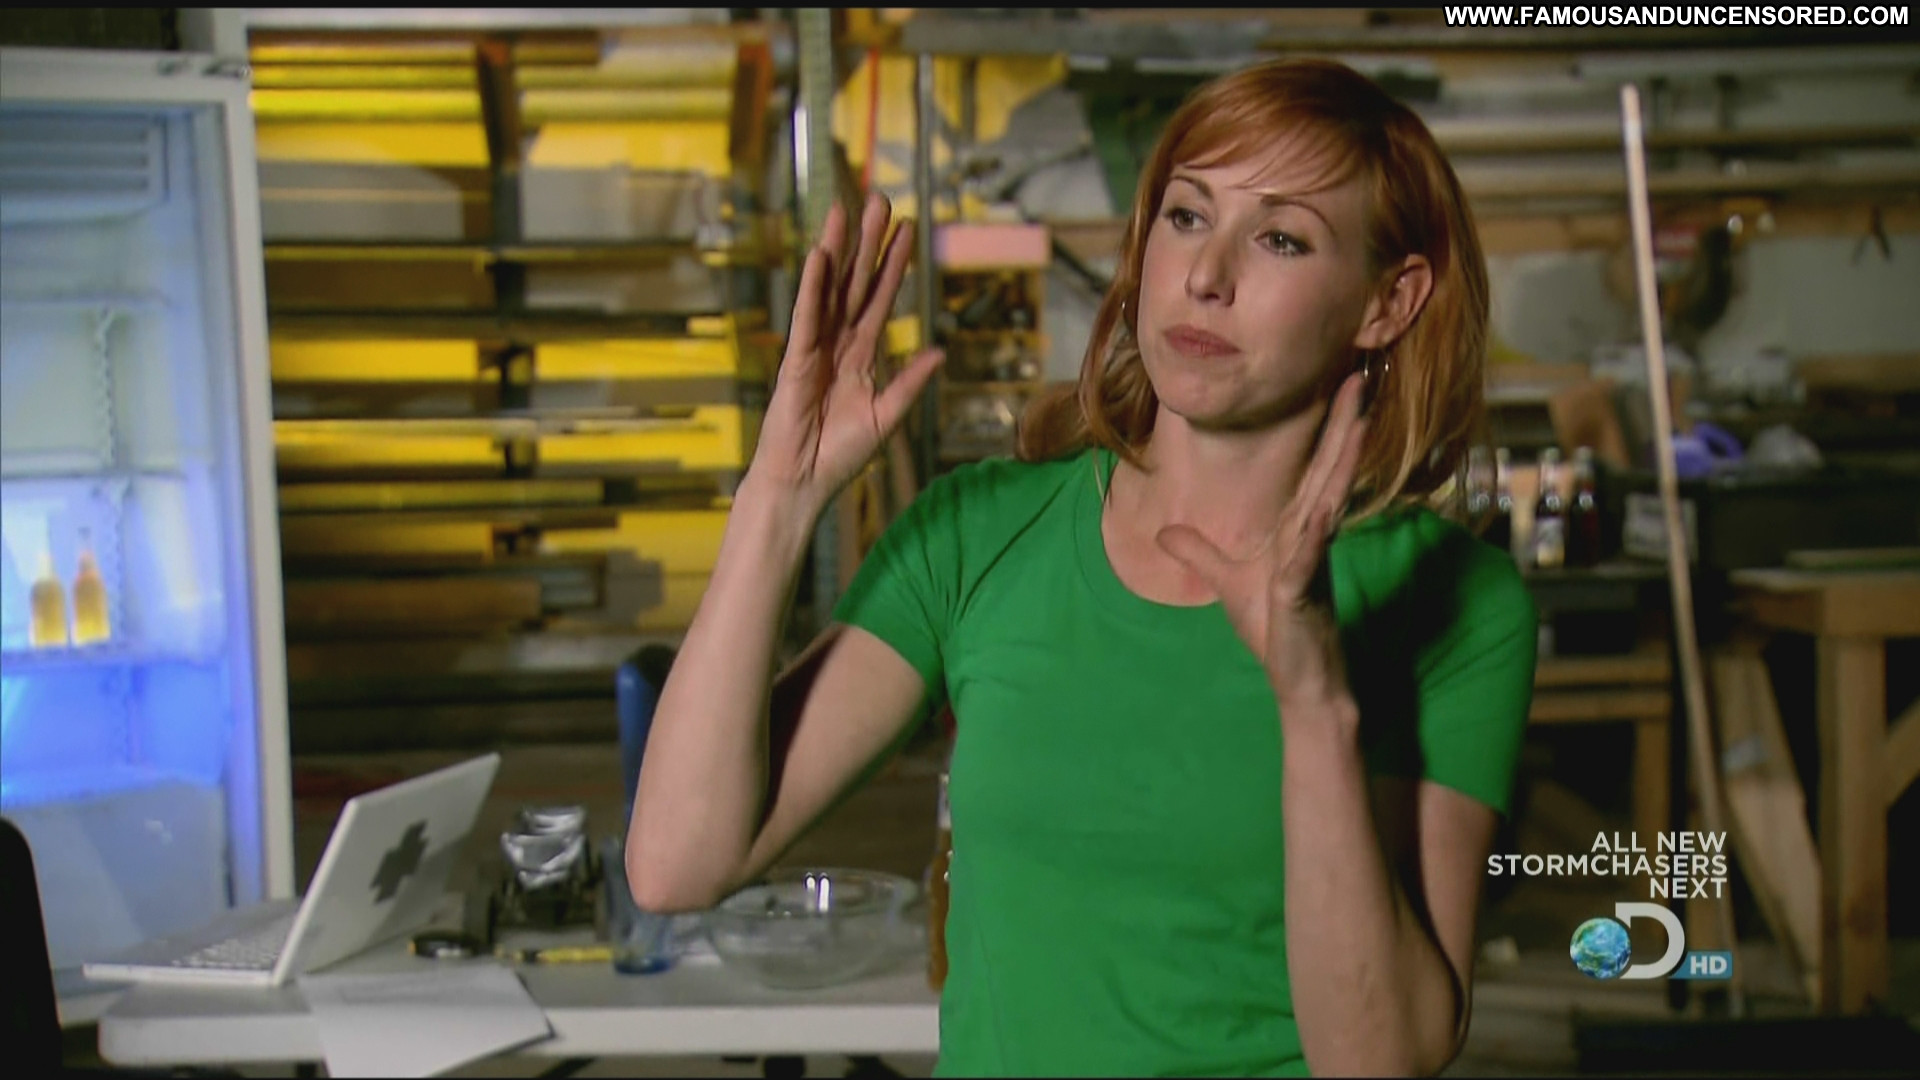 Sexy pictures of kari byron